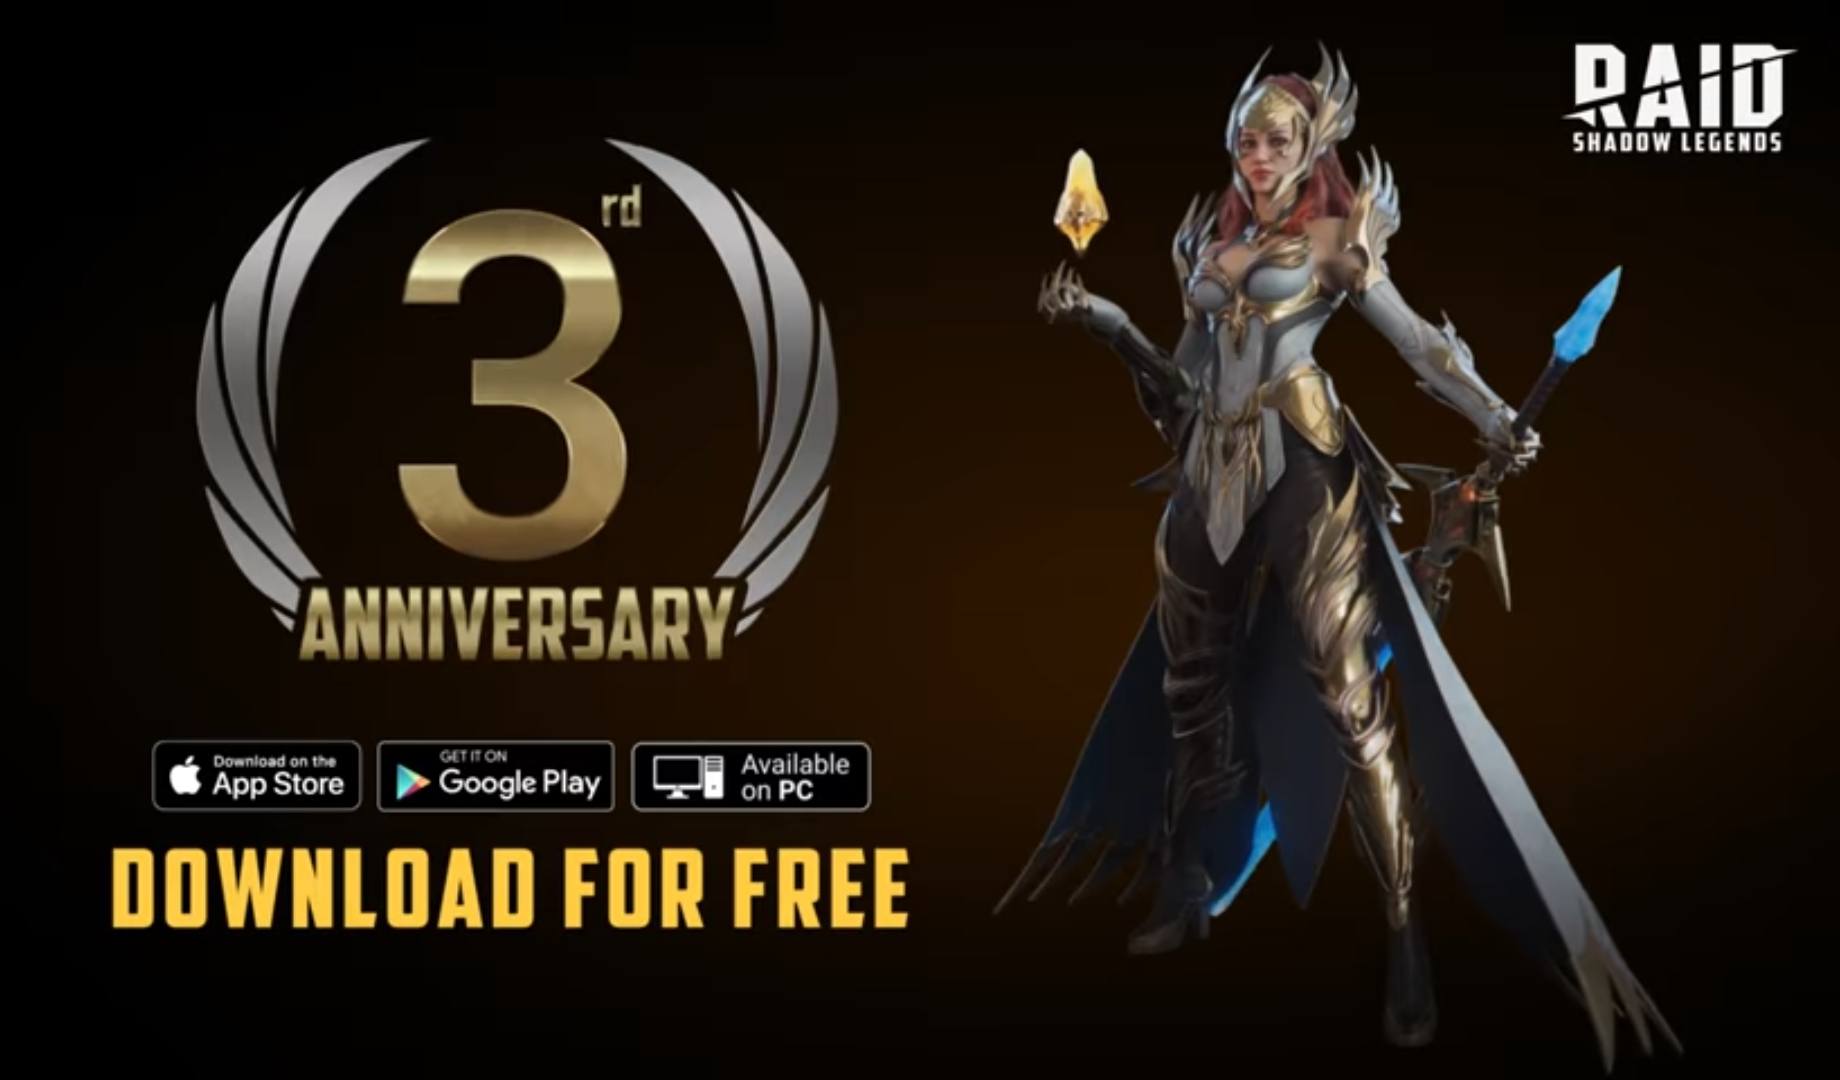 Raid Shadow Legends: Third Anniversary Specials, Events And More